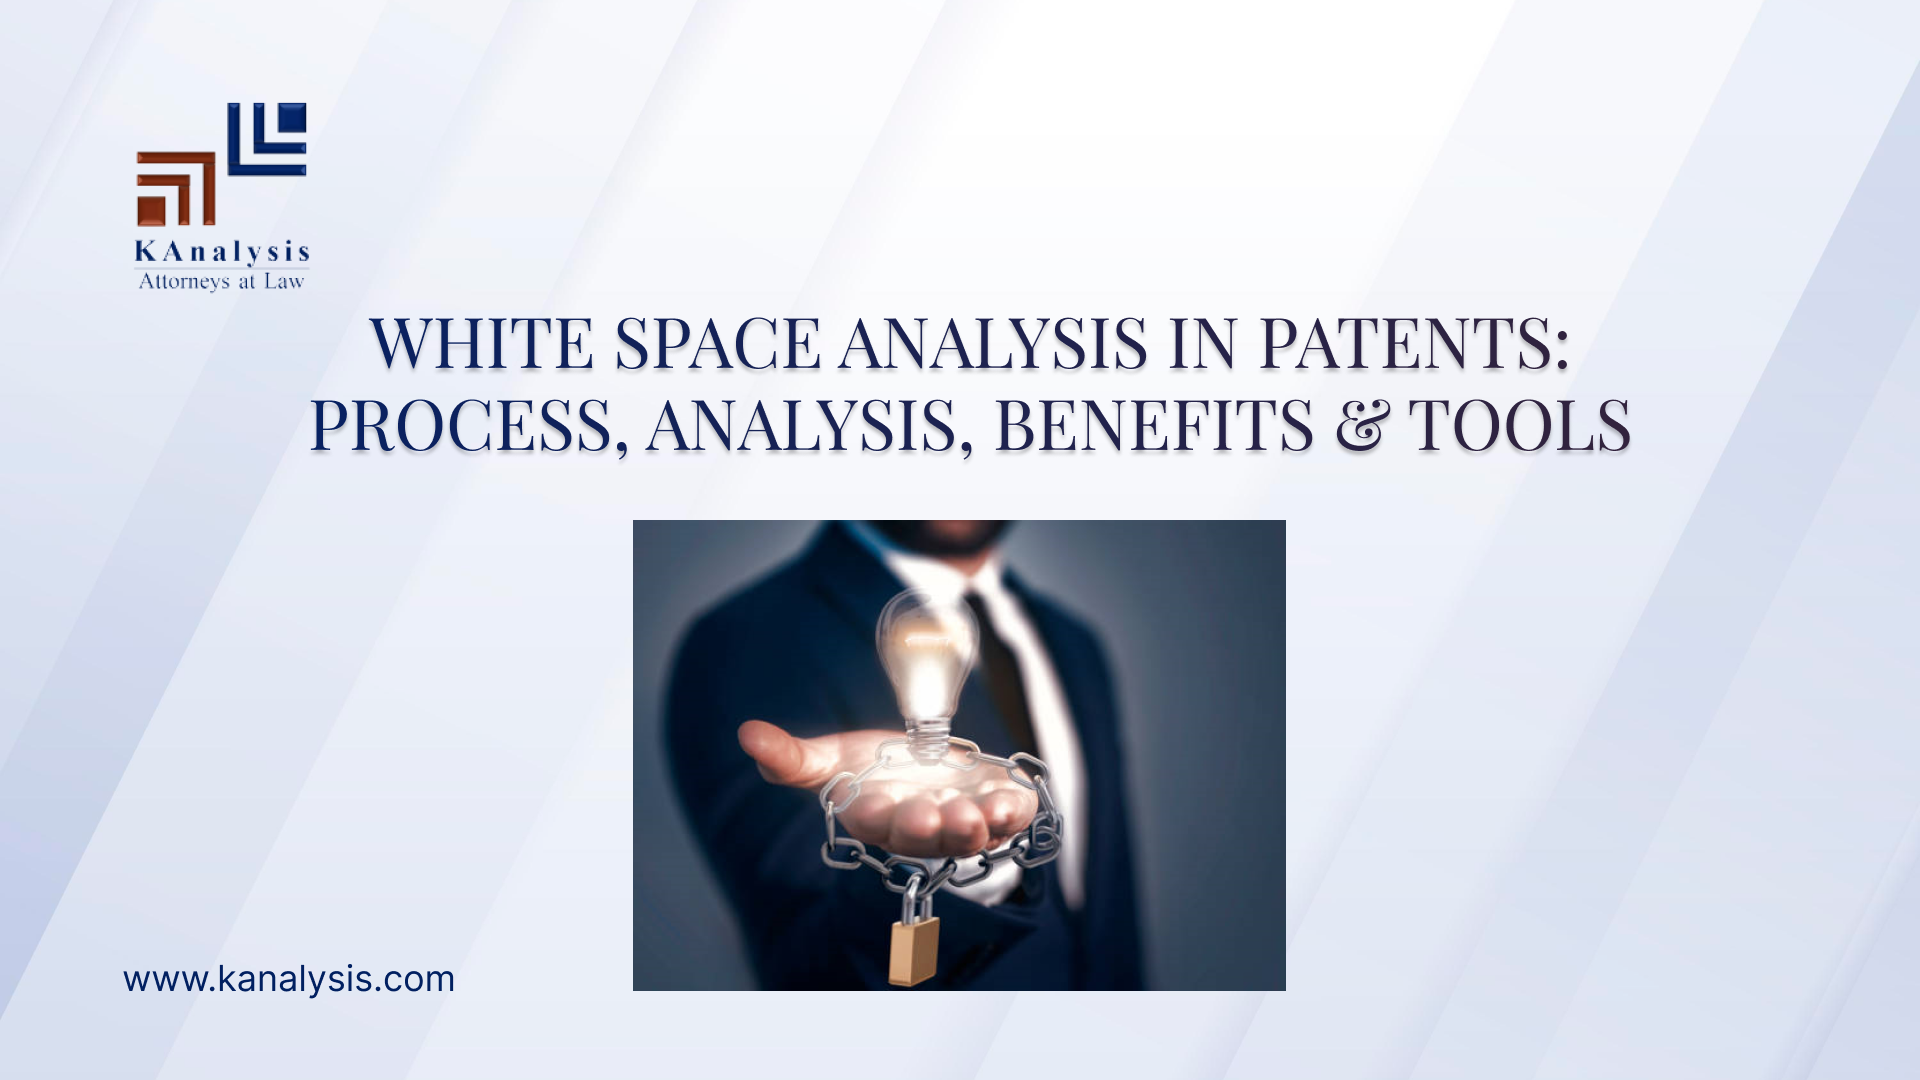 WHITE SPACE ANALYSIS IN PATENTS: PROCESS, ANALYSIS, BENEFITS AND TOOLS